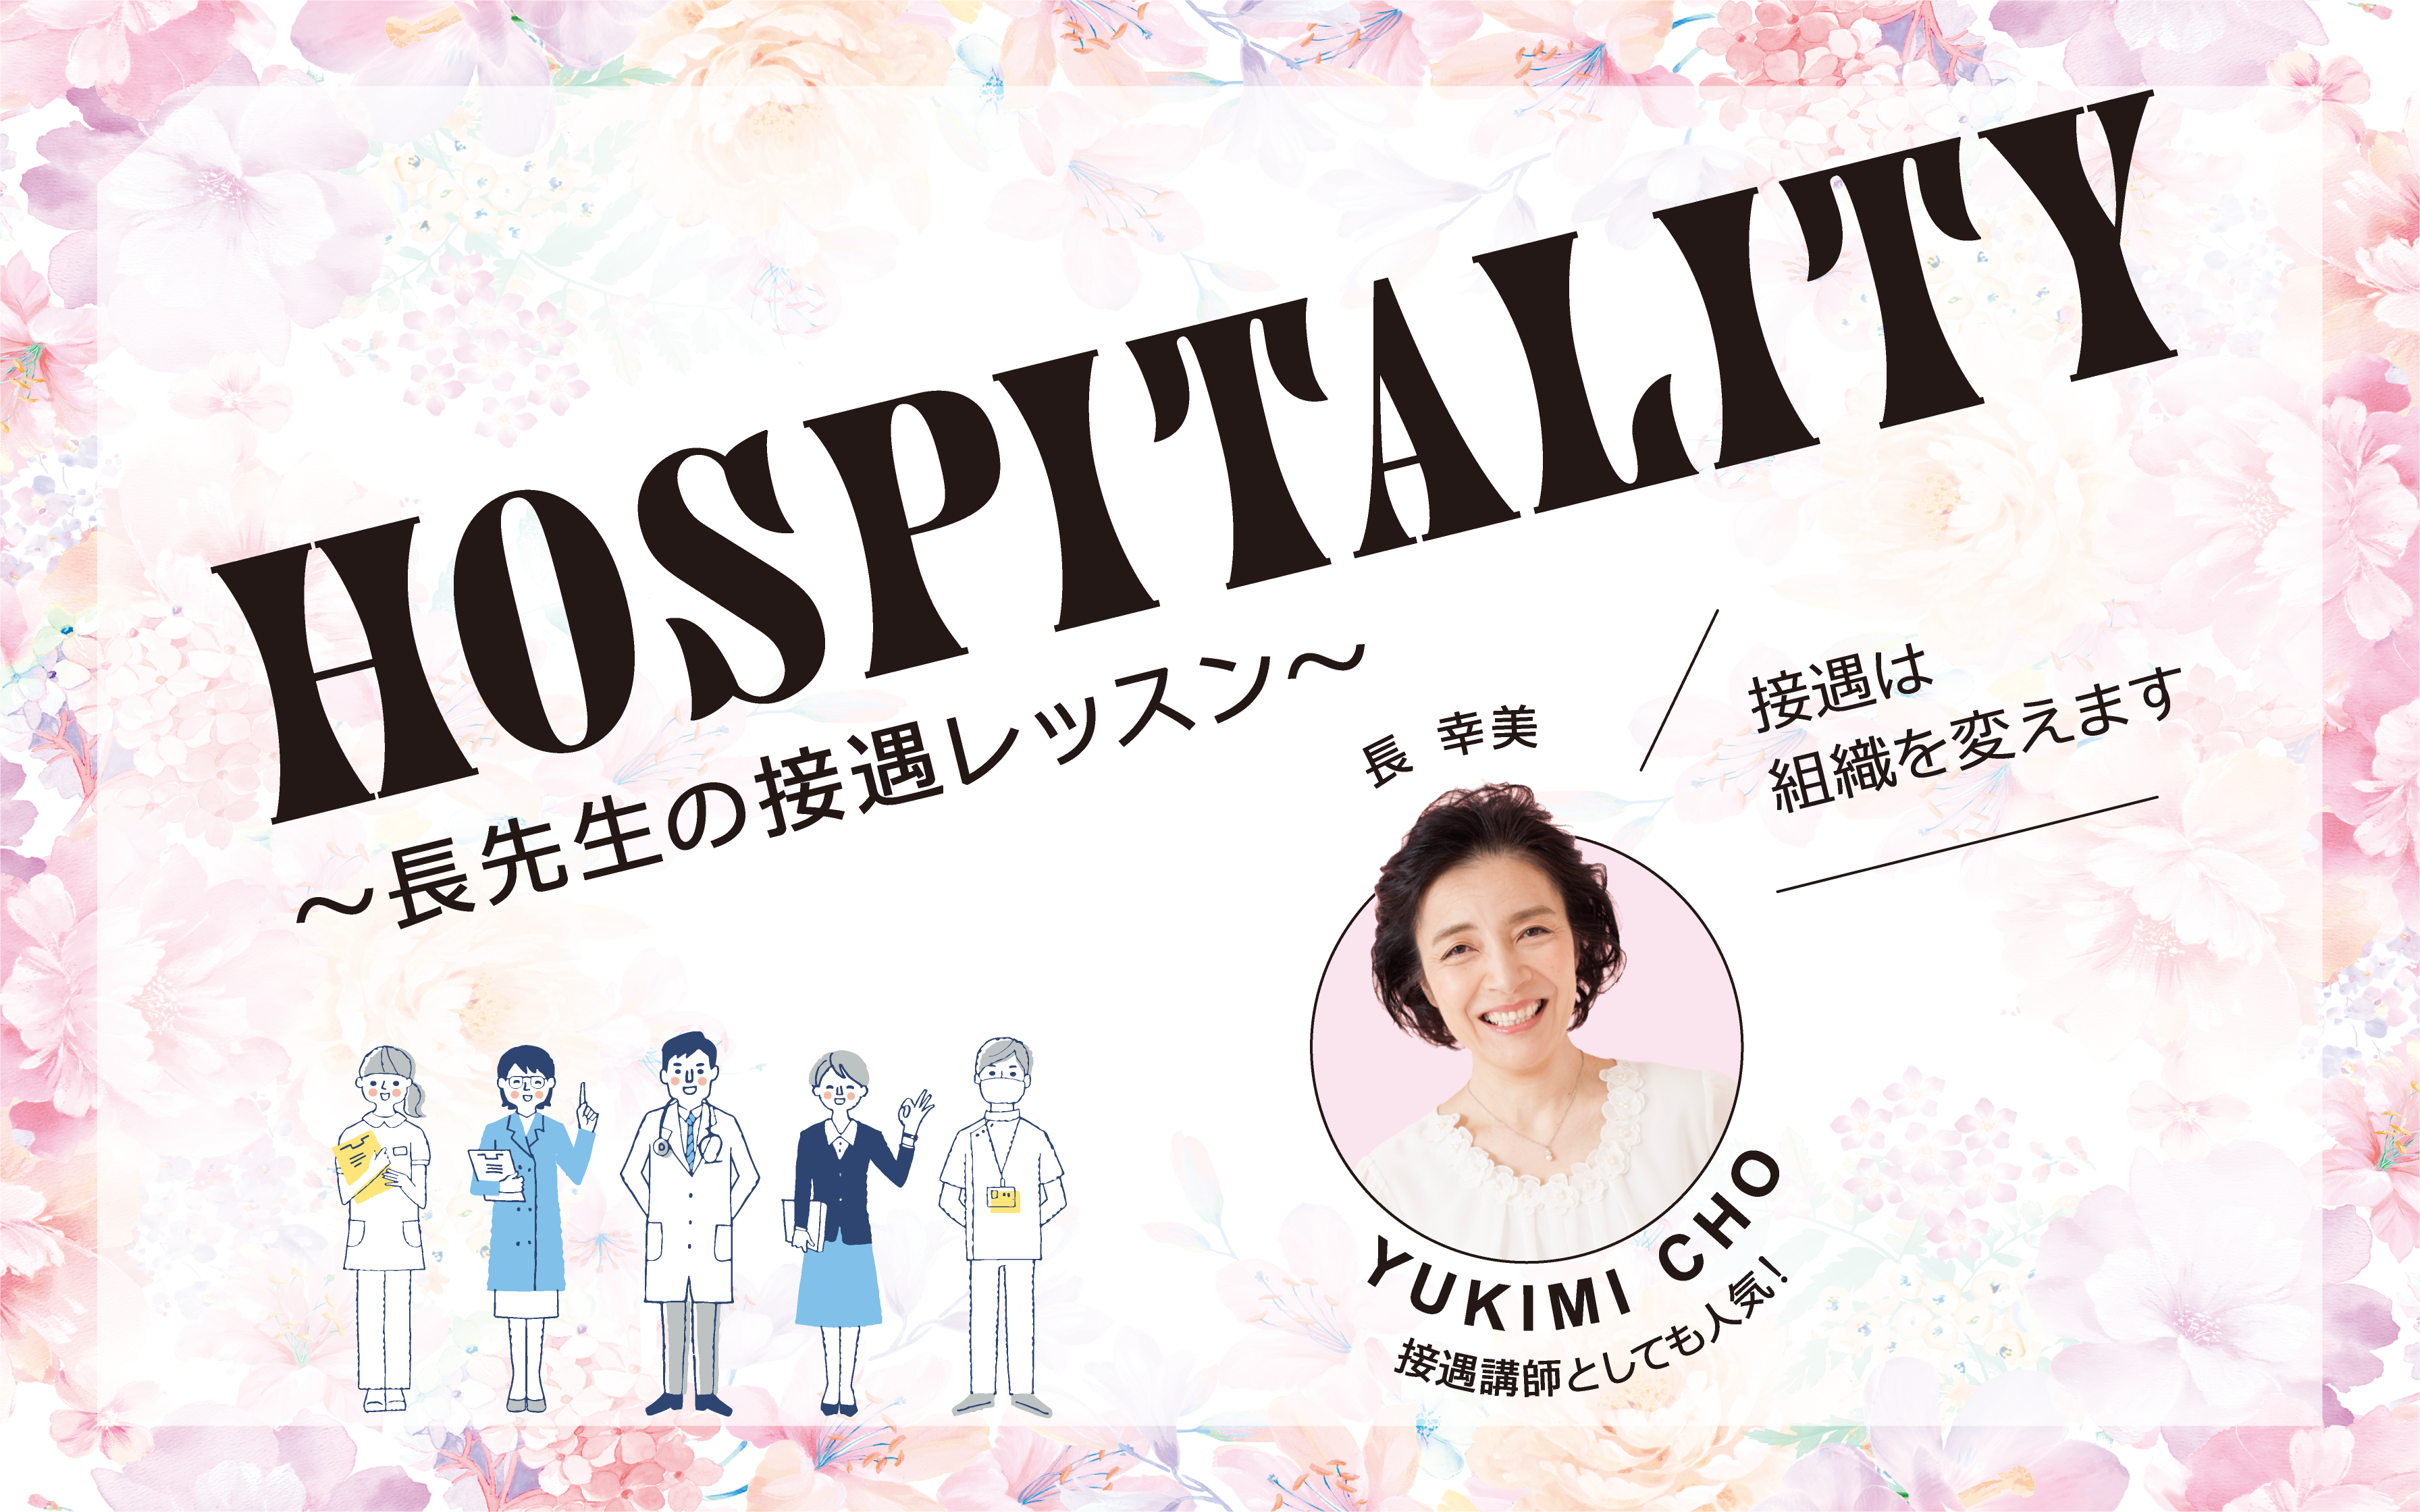 You are currently viewing HOSPITALITY 〜長先生の接遇レッスン〜 VOL.28　Yes,and〜〜でコミュニケーションを円滑に！